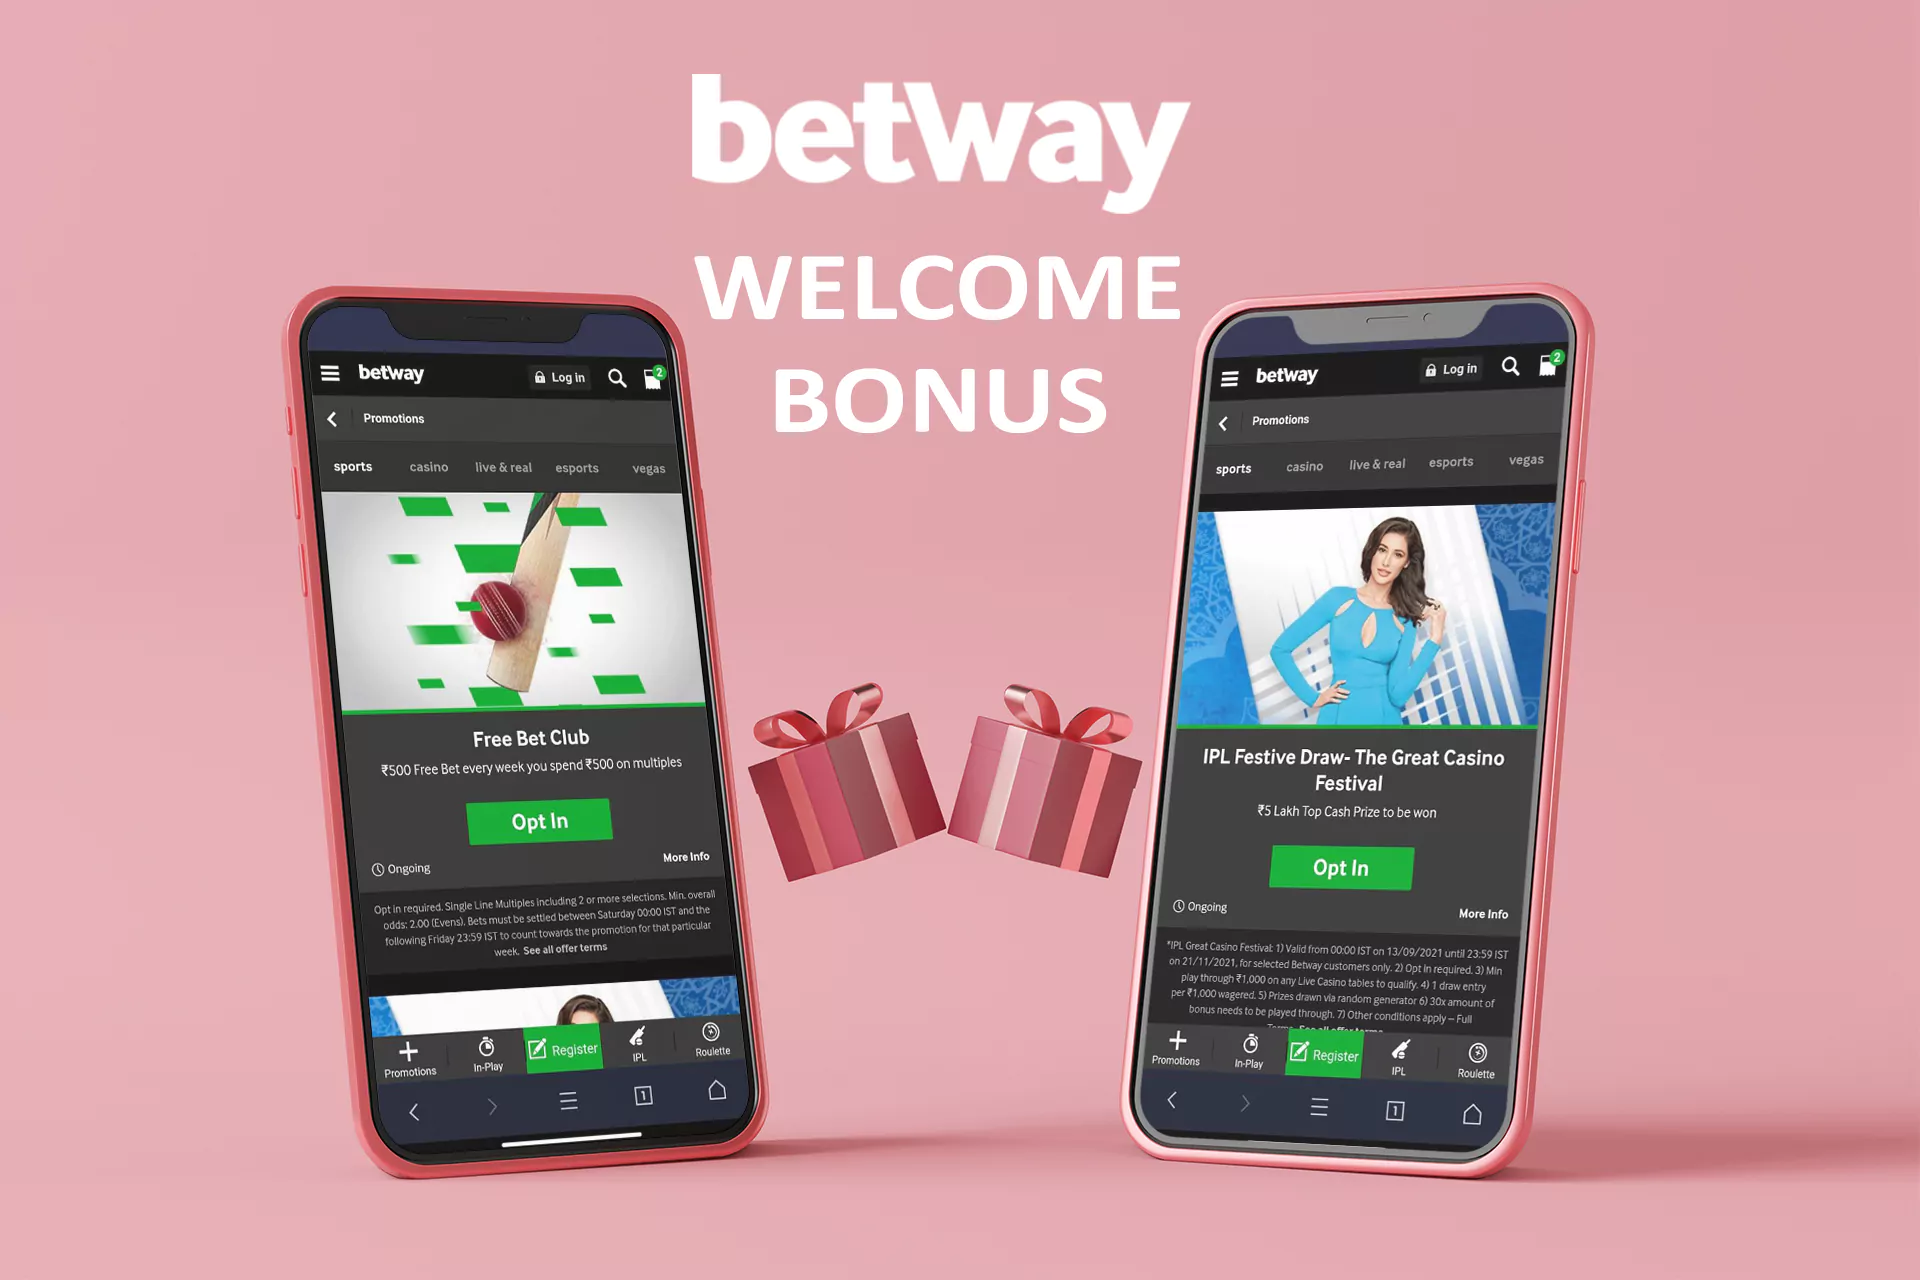 The welcome bonus also applies to mobile devices of the bookmaker, provided that you create your first account through the app.